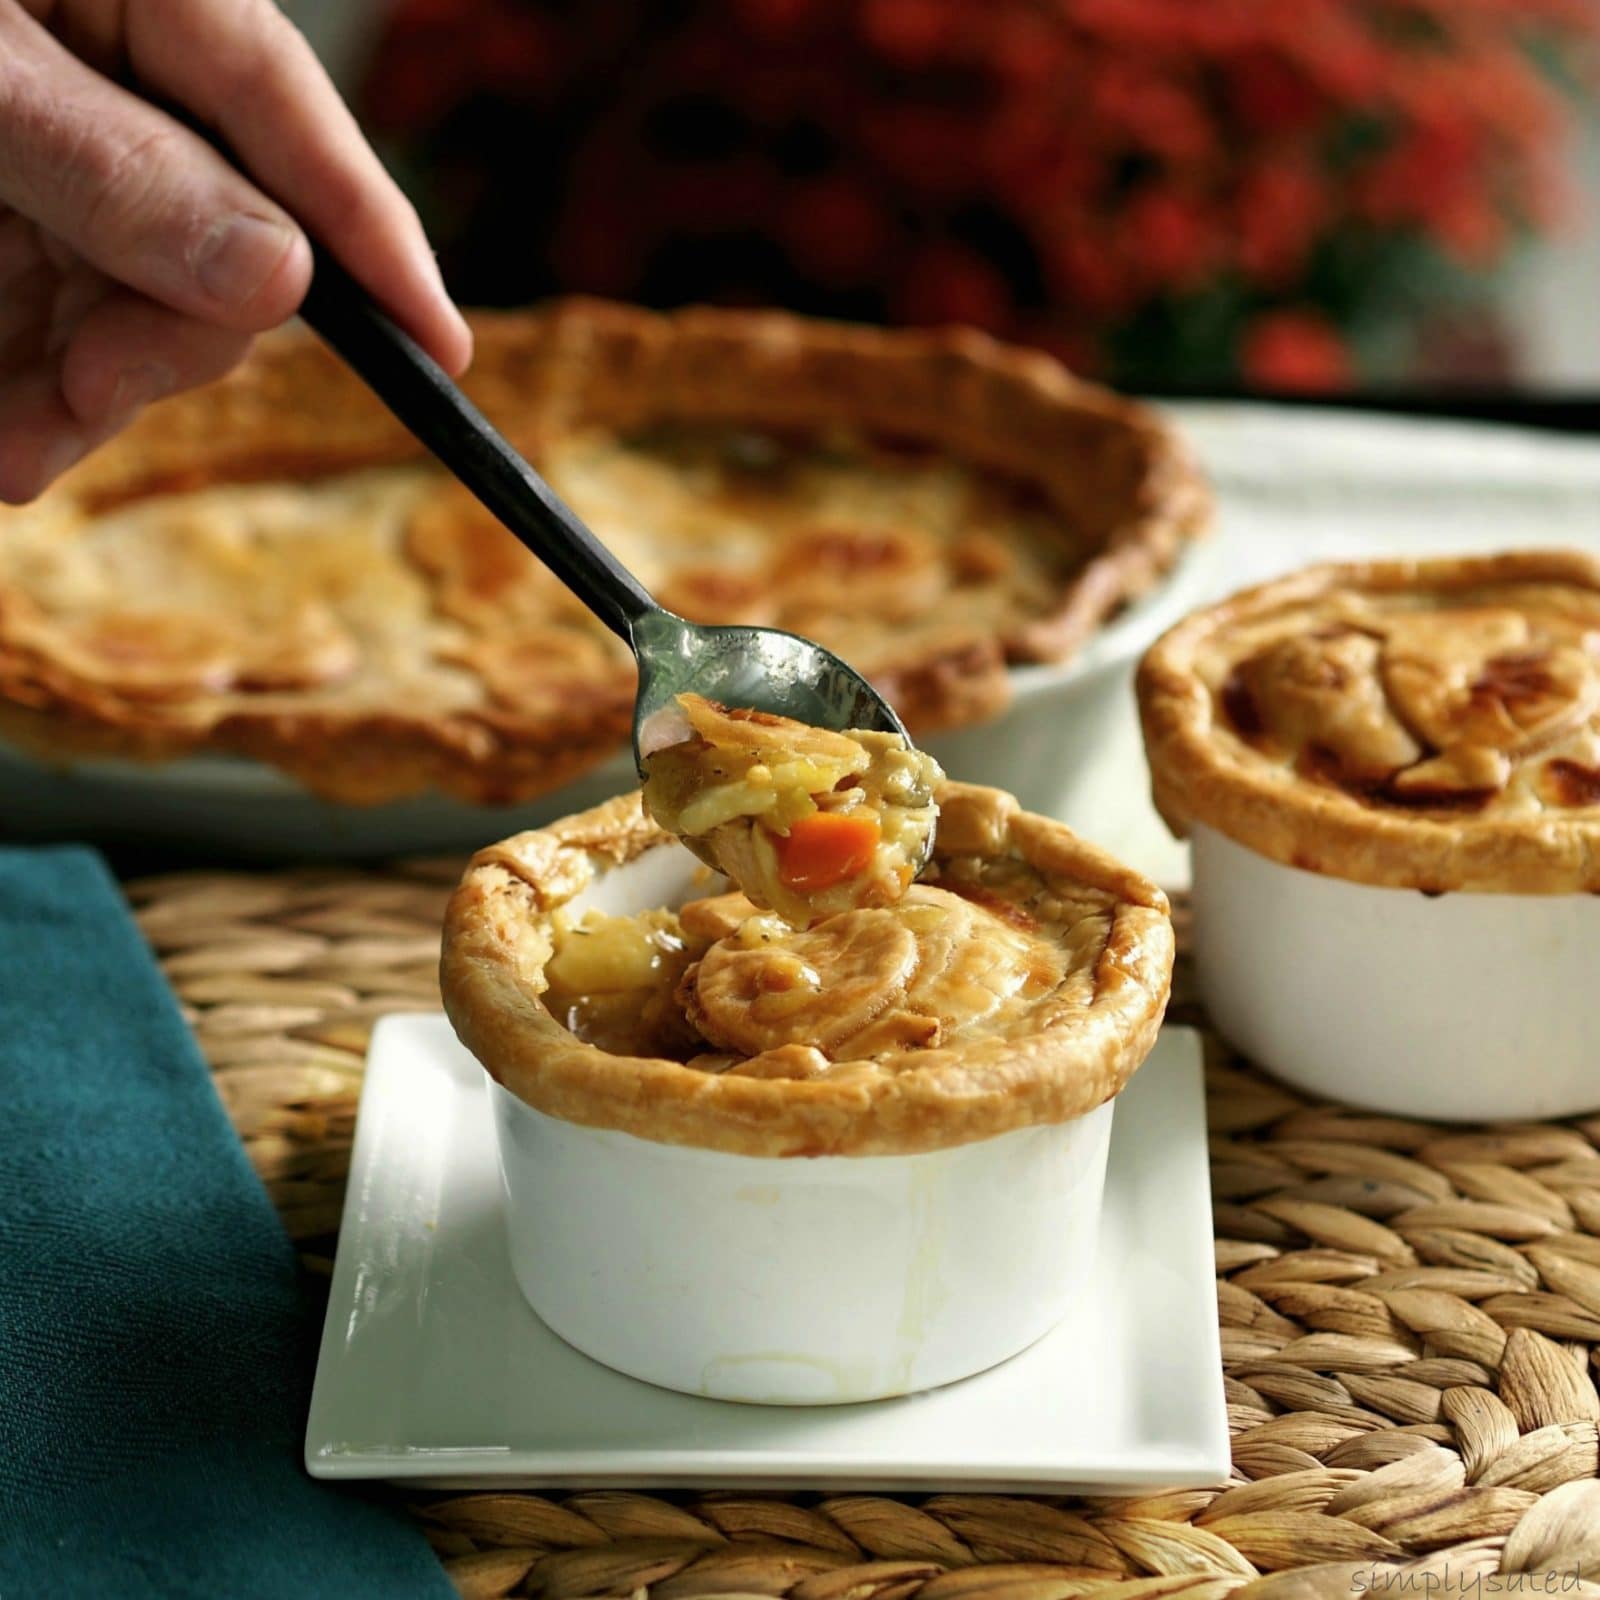 Chicken Pot Pie is the epitome of comfort food and this recipe has it all.